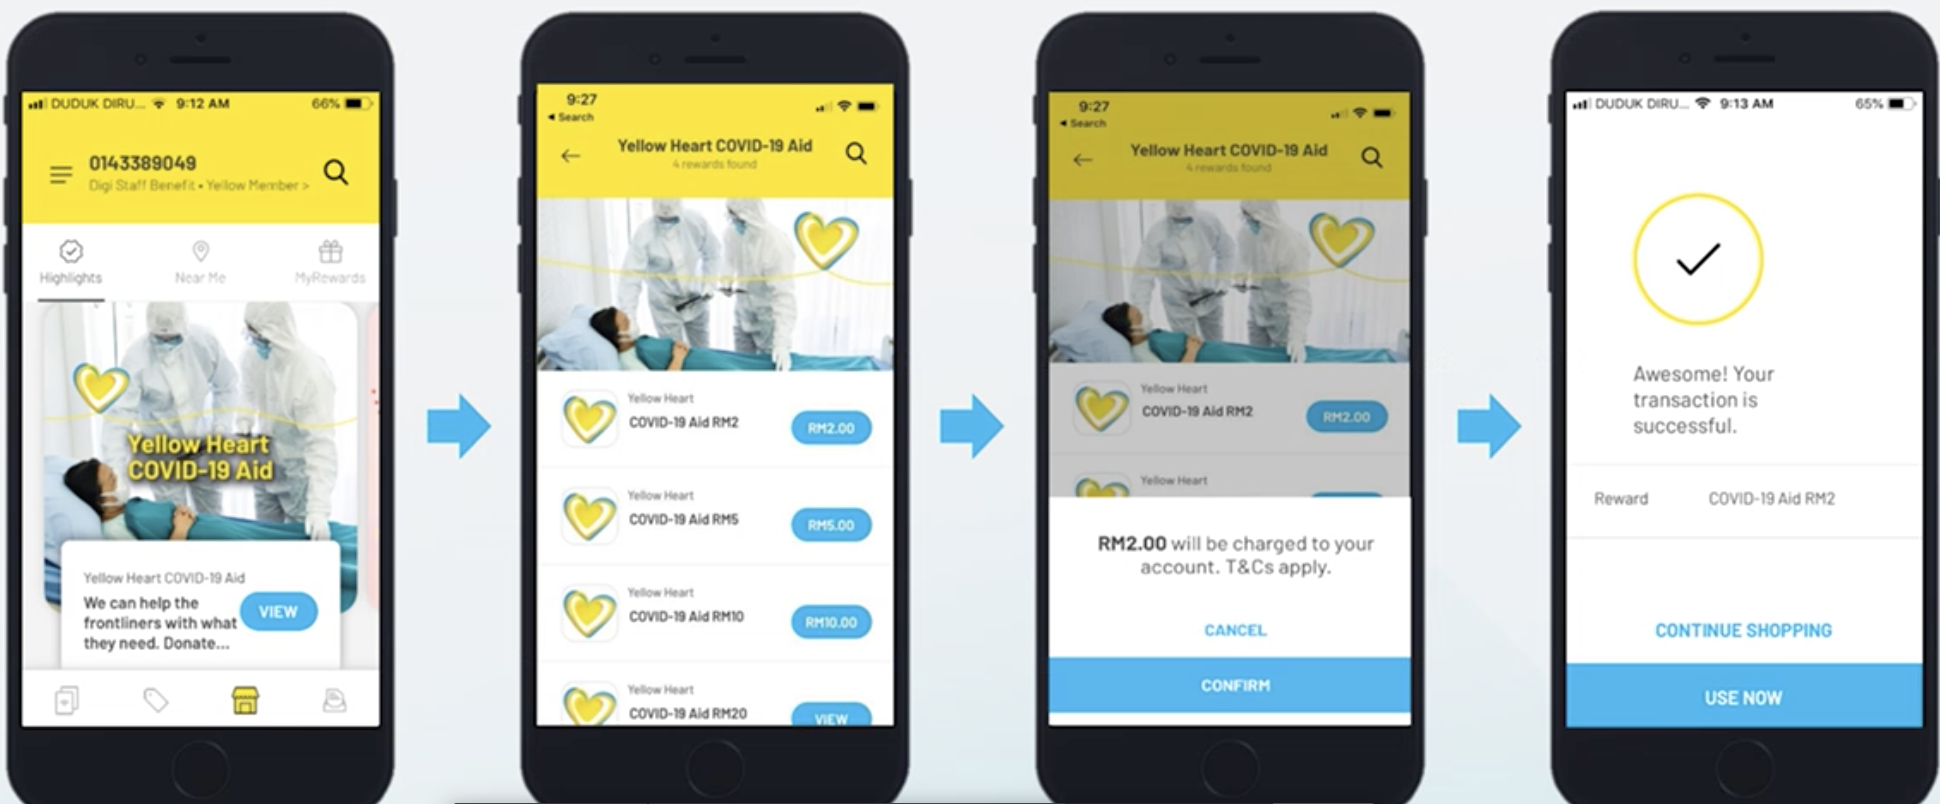 You can donate to COVID-19 aid fundraiser on MyDigi app